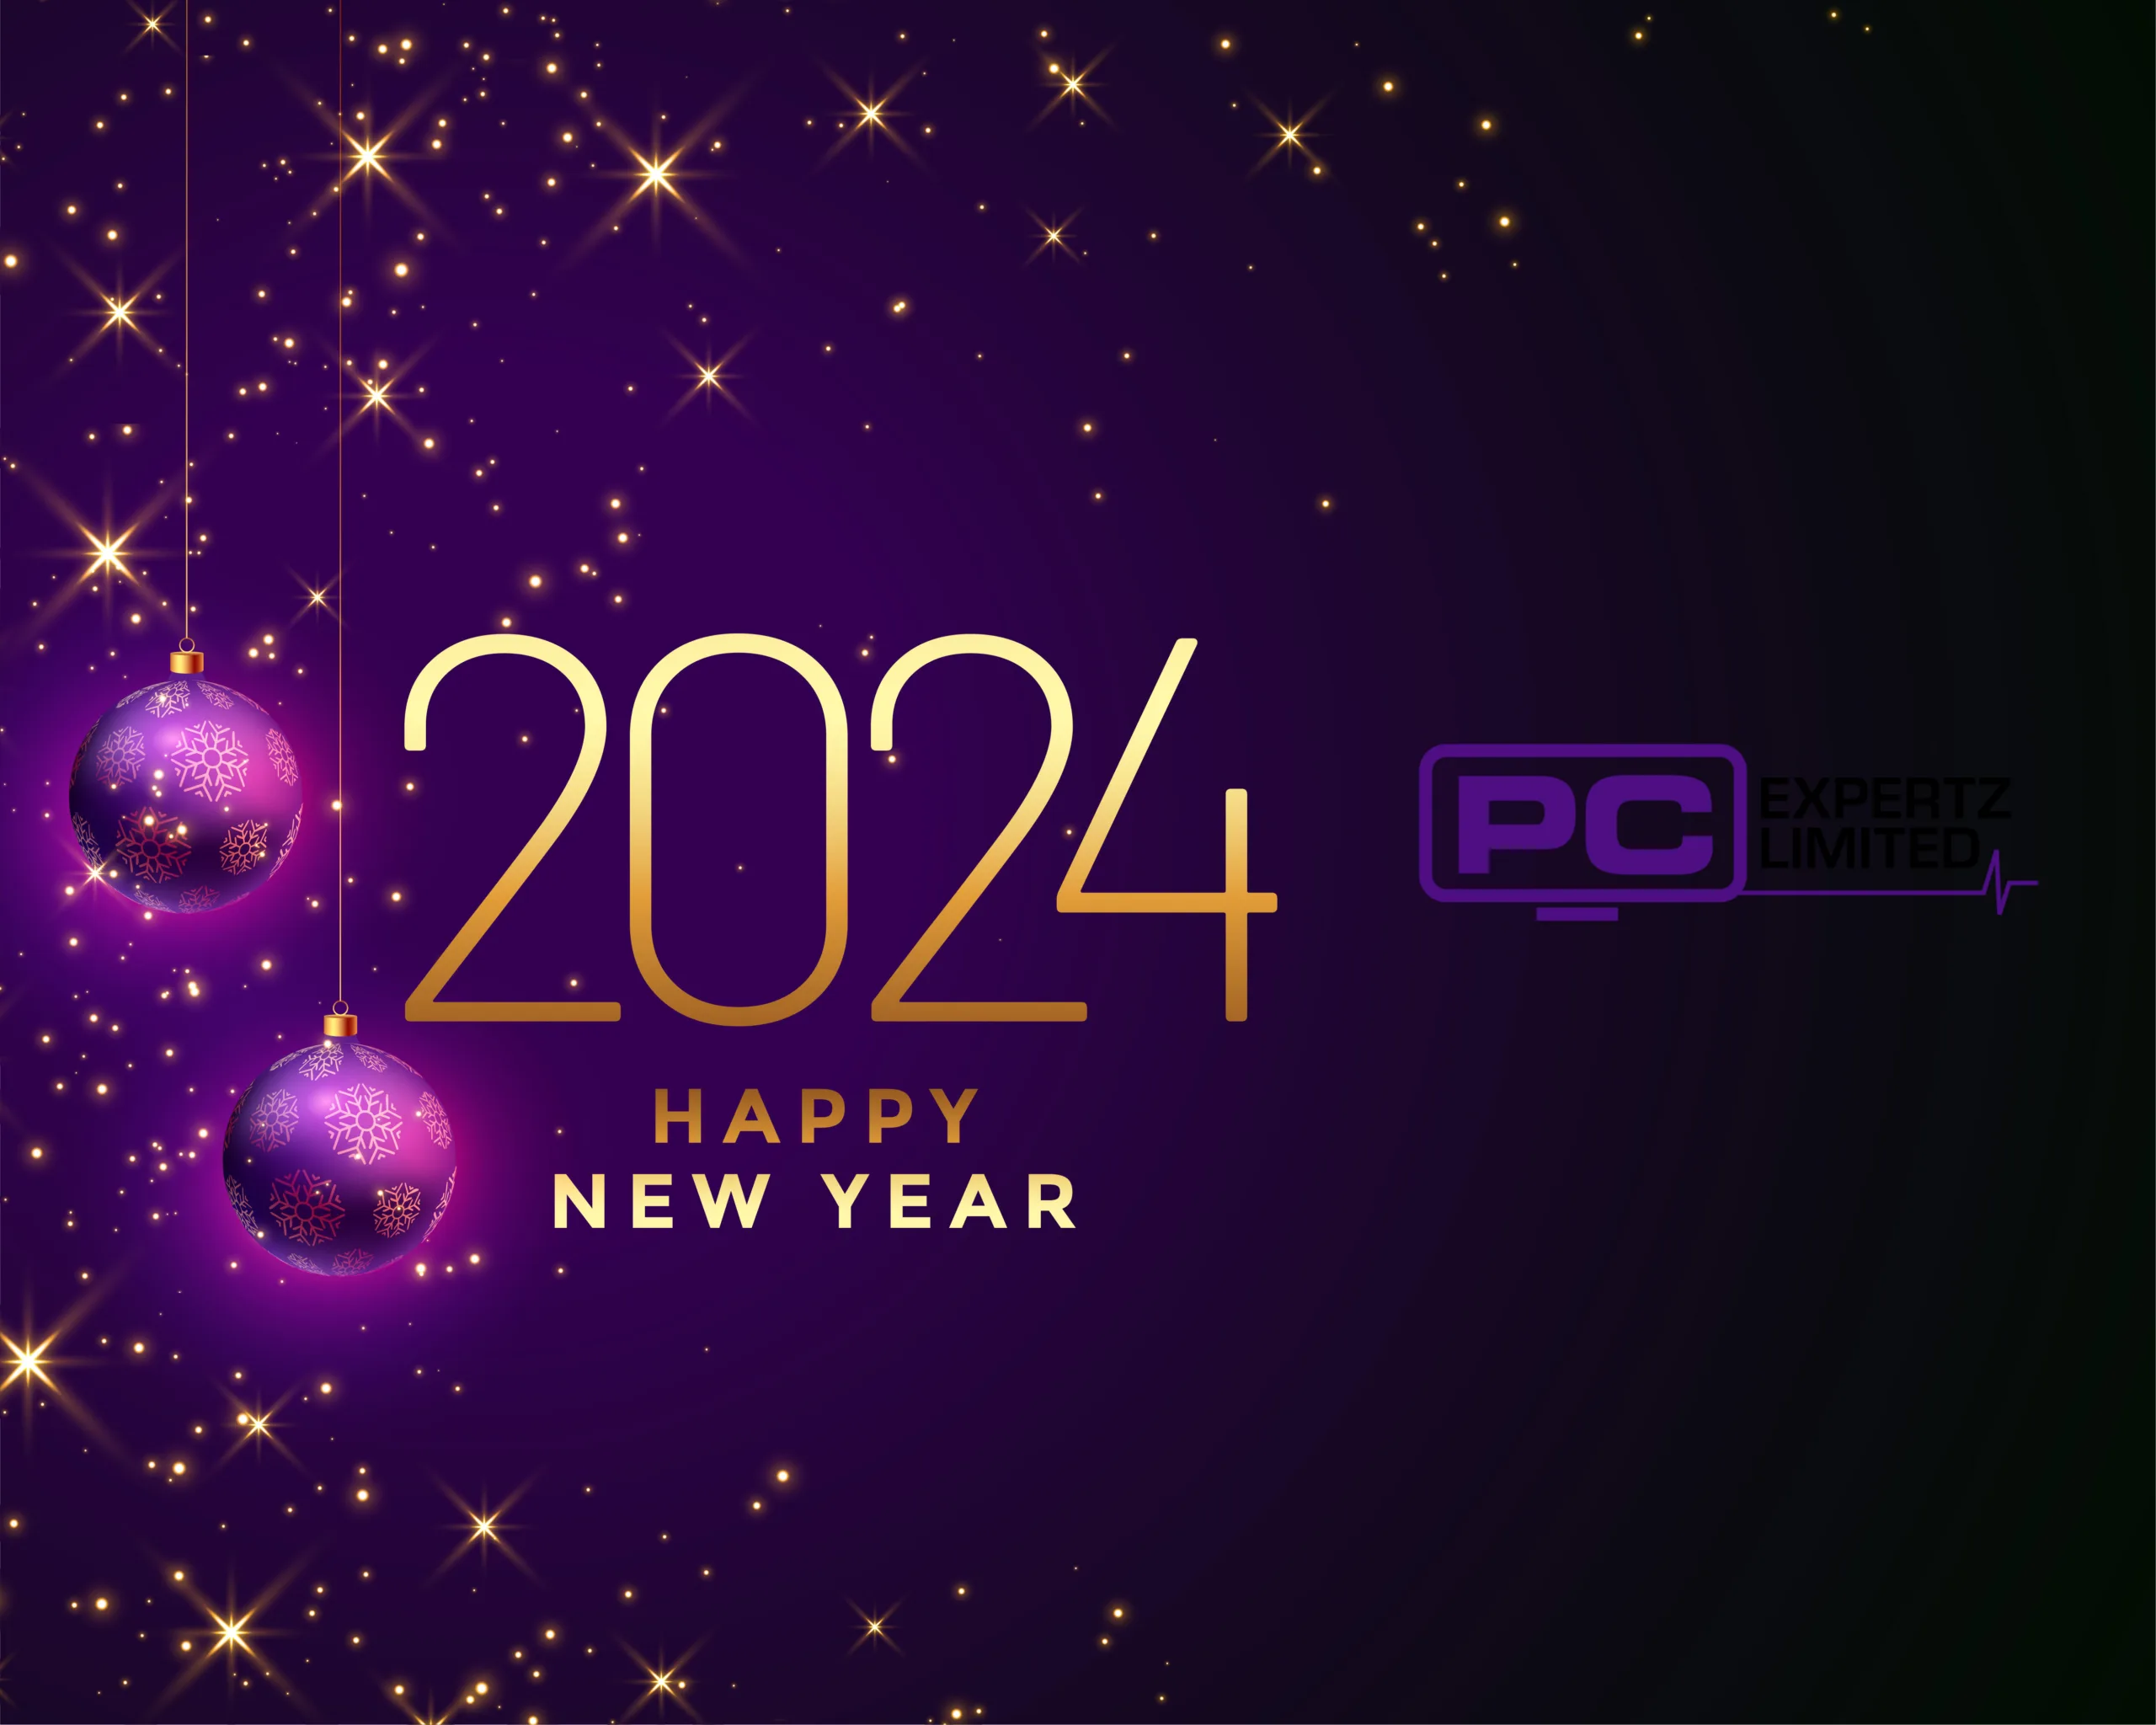 Happy New Year 2024 from PC Expertz Limited!